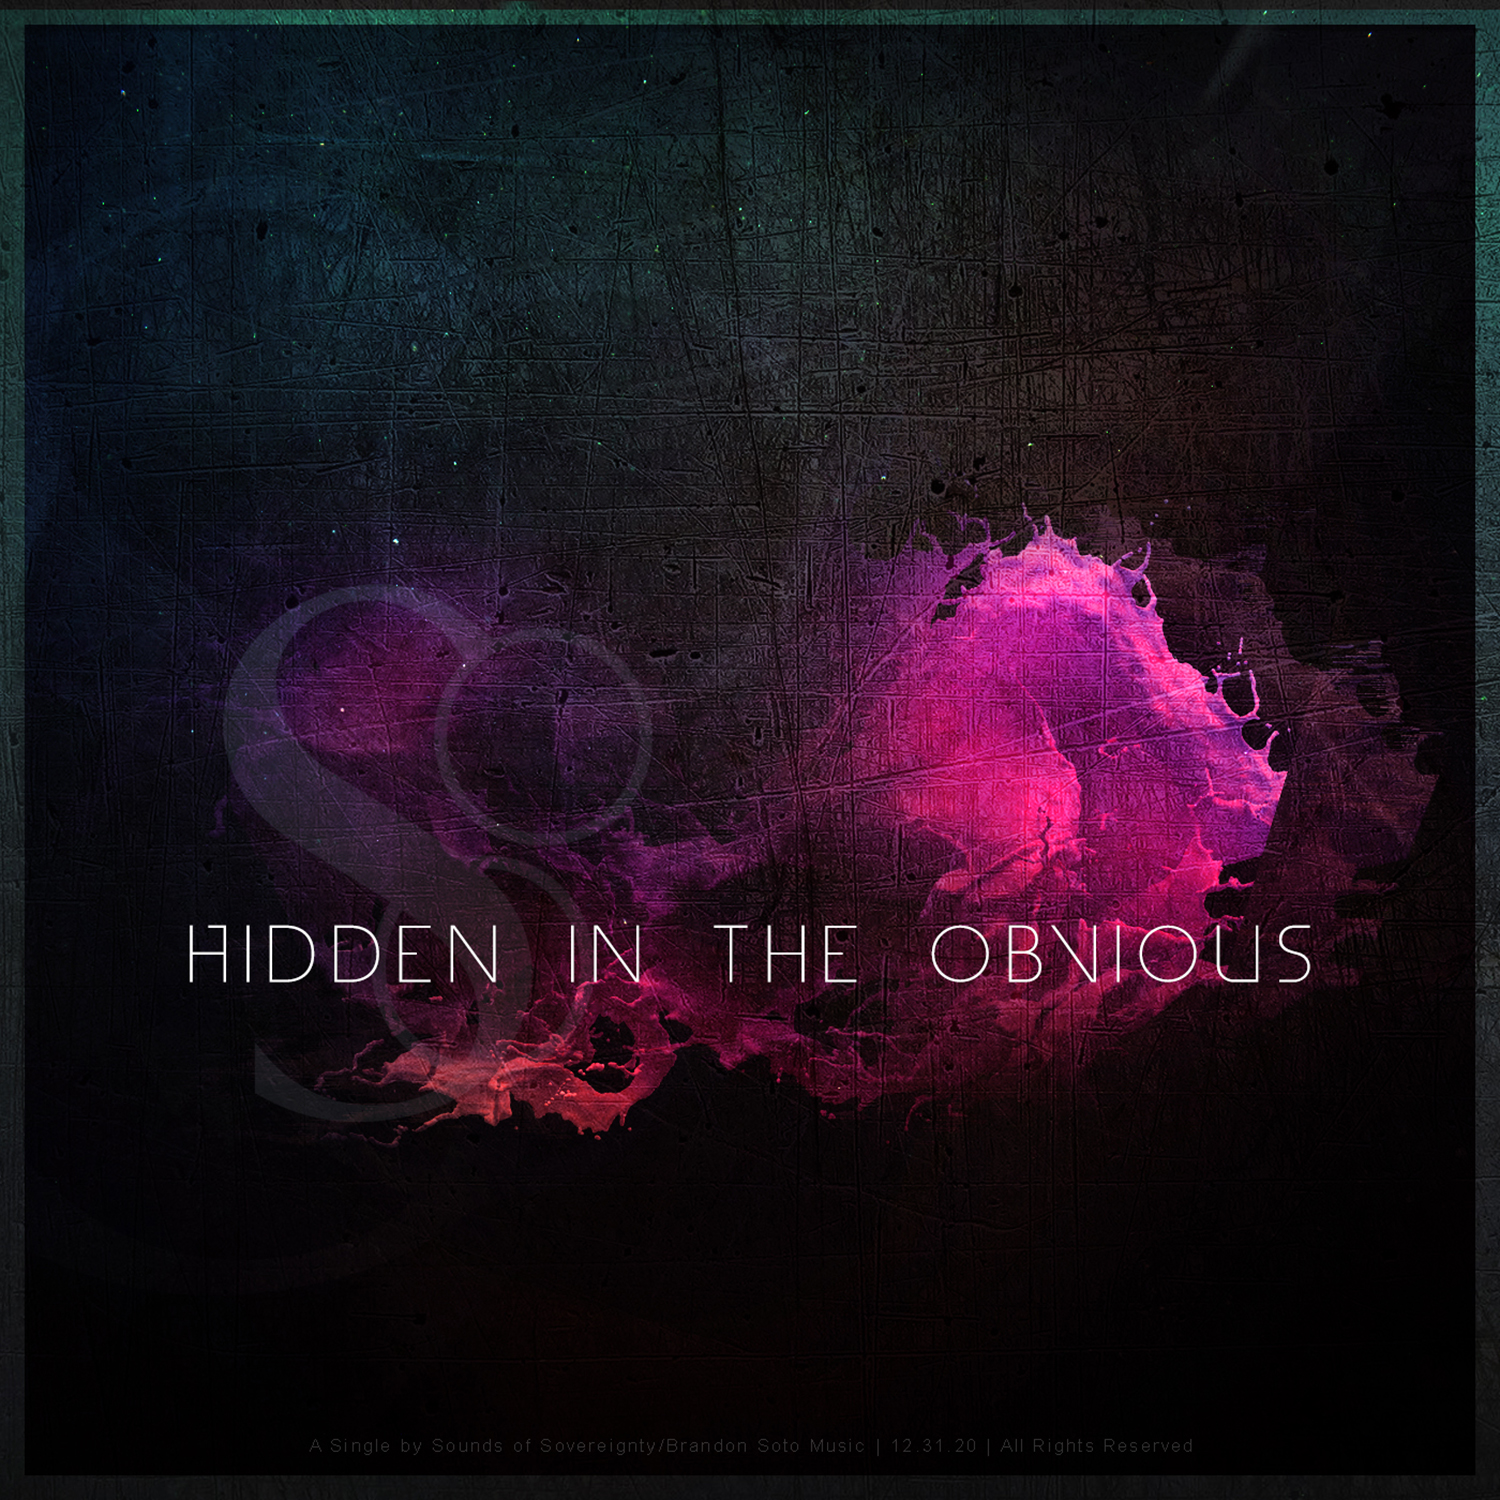 Brandon Soto's Sounds of Sovereignty Release - Hidden in The Obvious